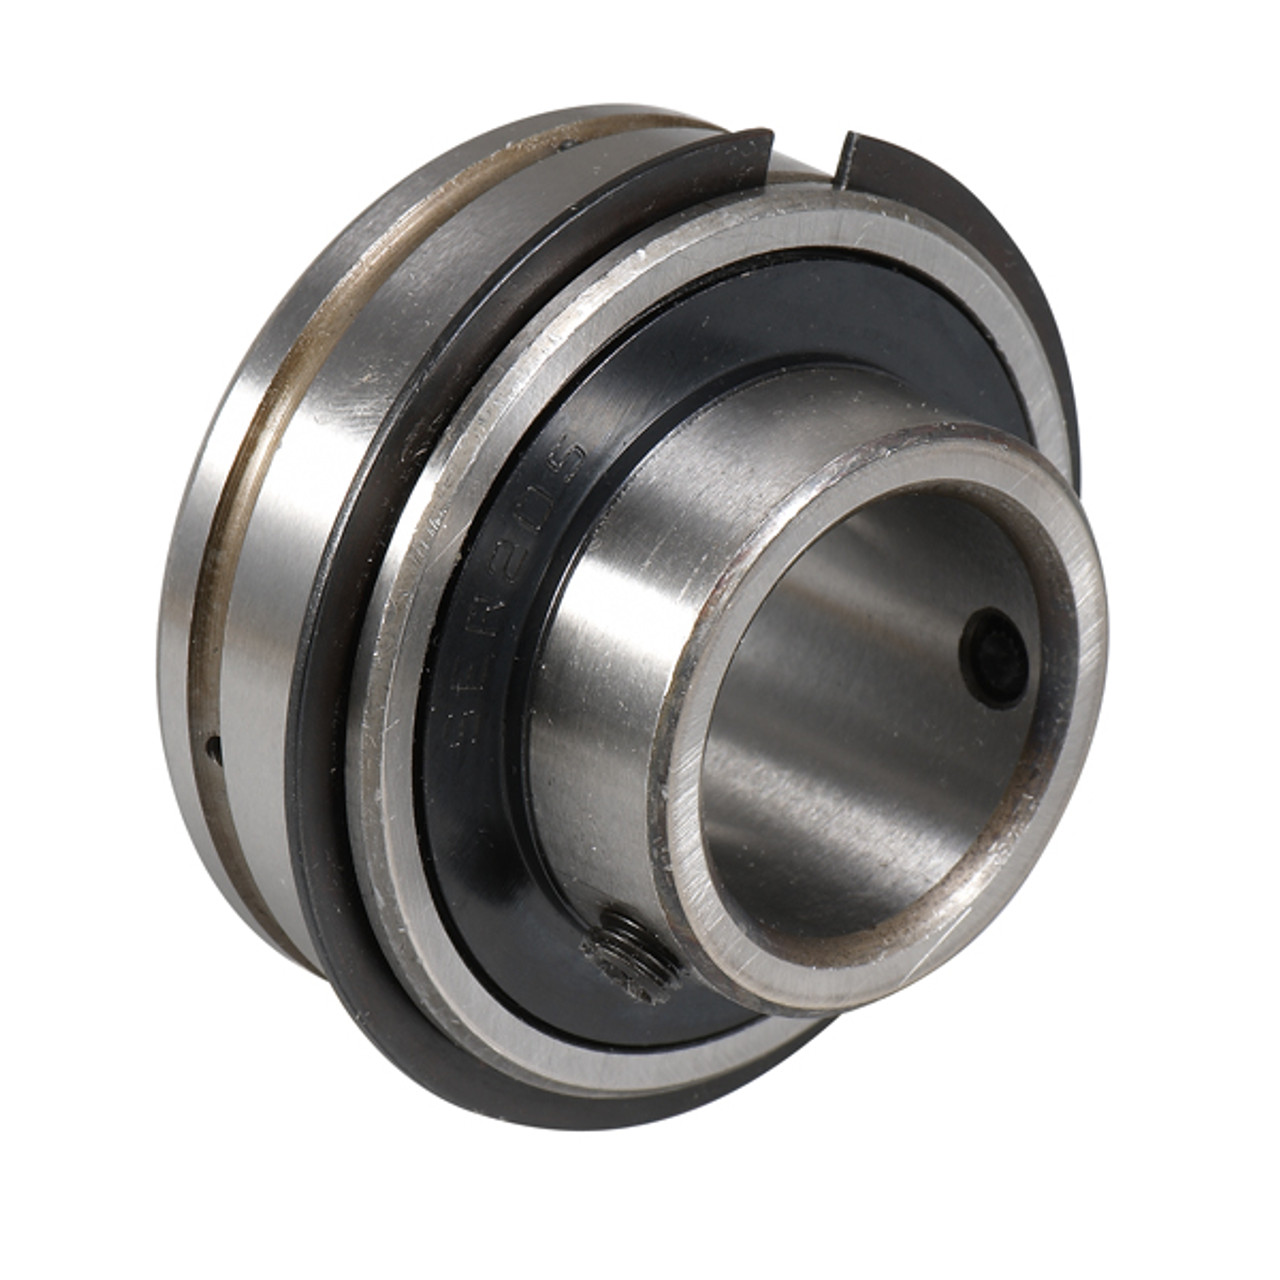 SER208 GENERIC 40mm Normal duty bearing insert with a parallel outer race and grubscrew locking - Metric Thumbnail